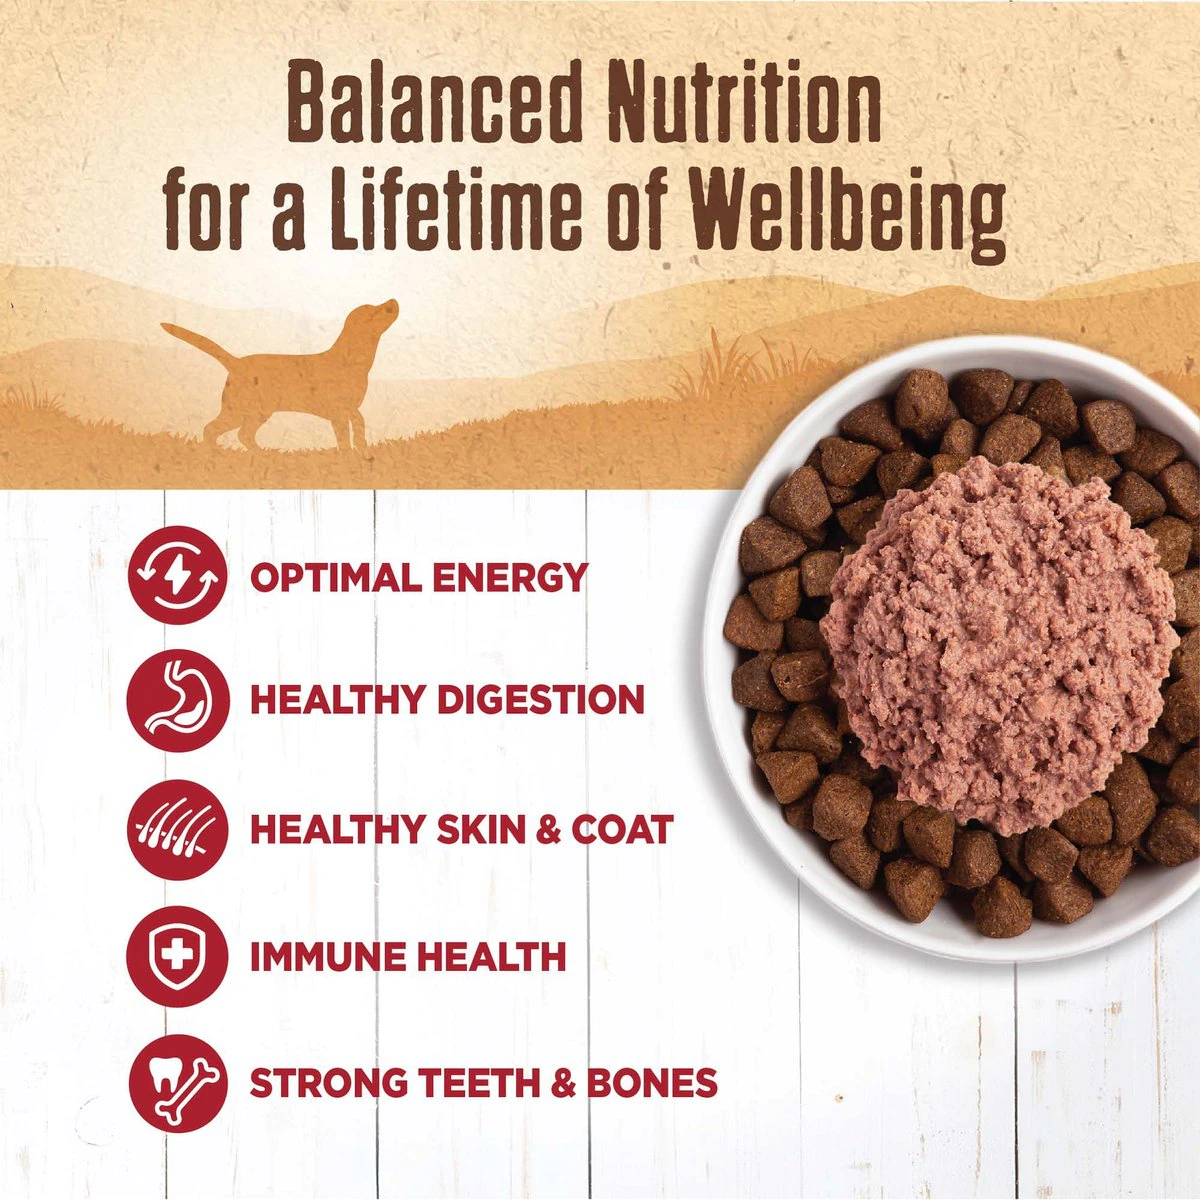 Wellness Canned Dog Food 95% Beef  Canned Dog Food  | PetMax Canada